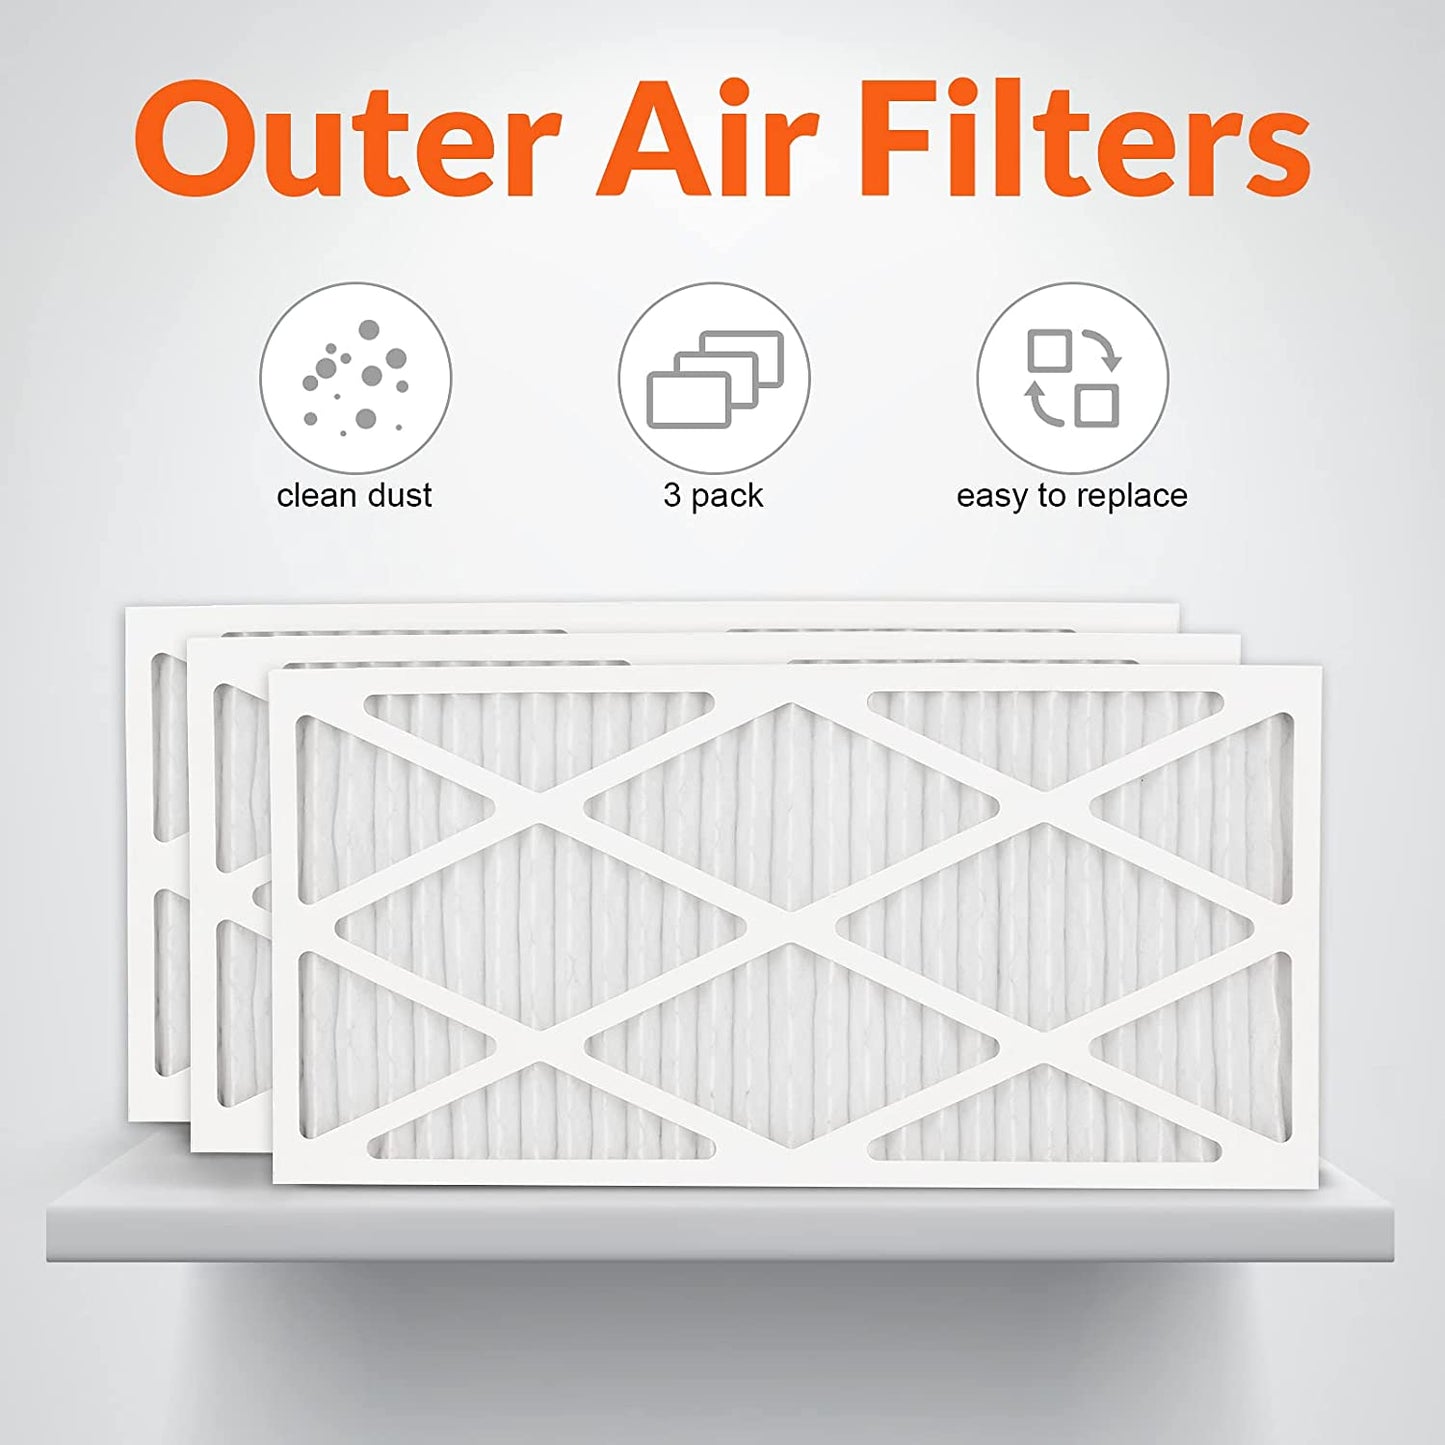 Purisystems 5-Micron Outer Air Filters for the PuriCare 1100IG / PuriCare 1100 Air Filtration System, 3-Pack AlorAir